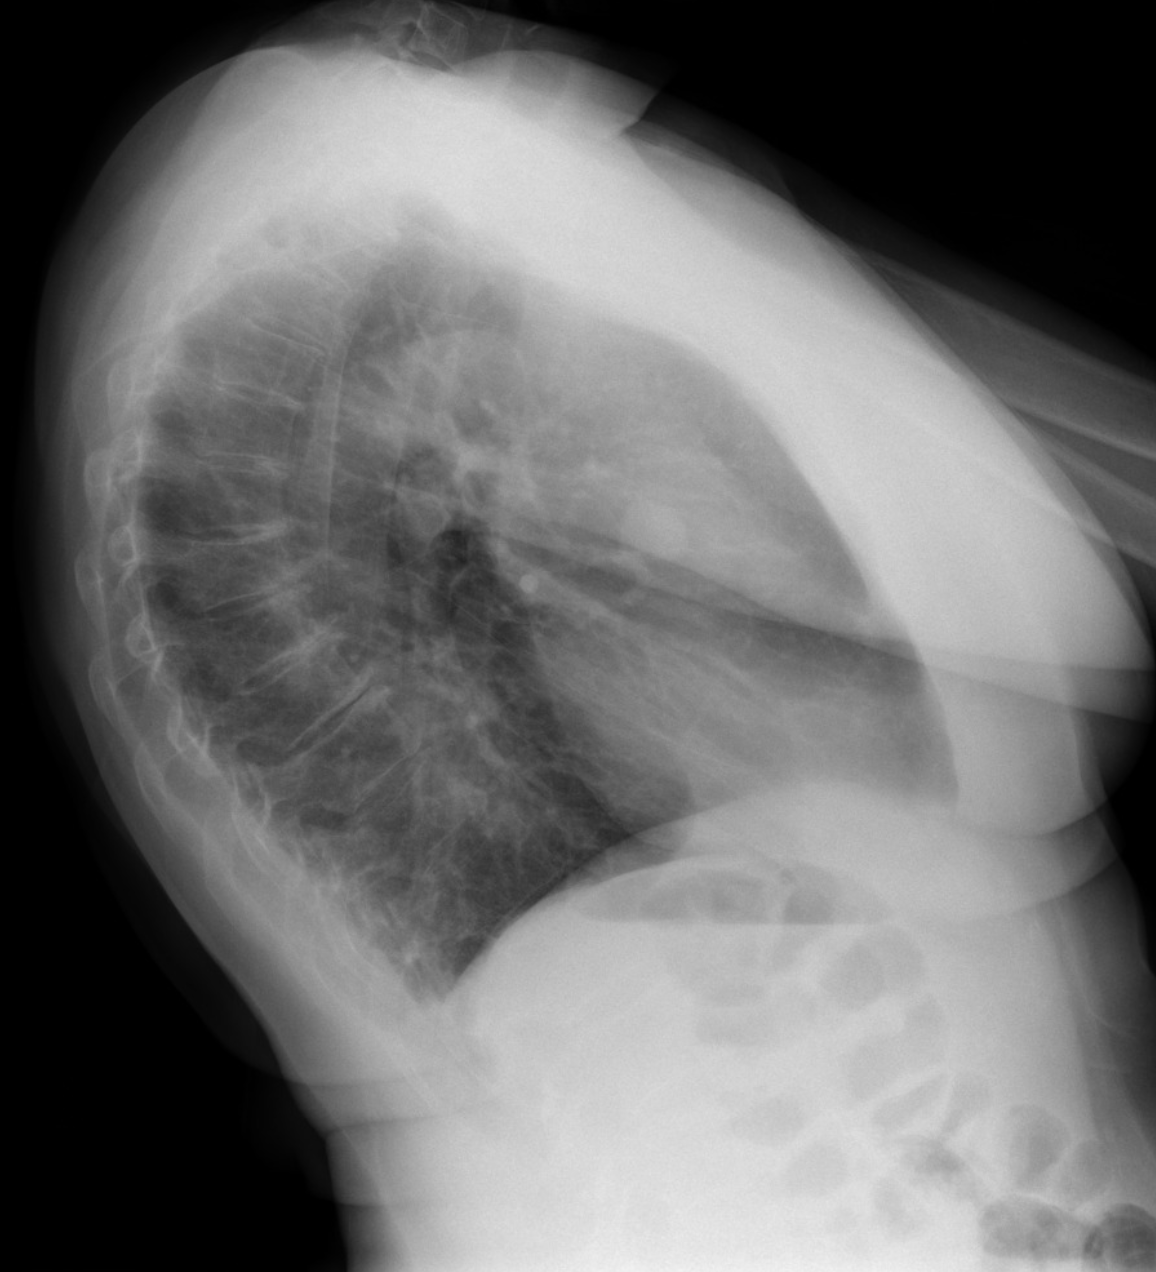 Lateral chest x-ray (CXR) shows a well circumscribed soft tissue attenuation lesion overlapping the heart.